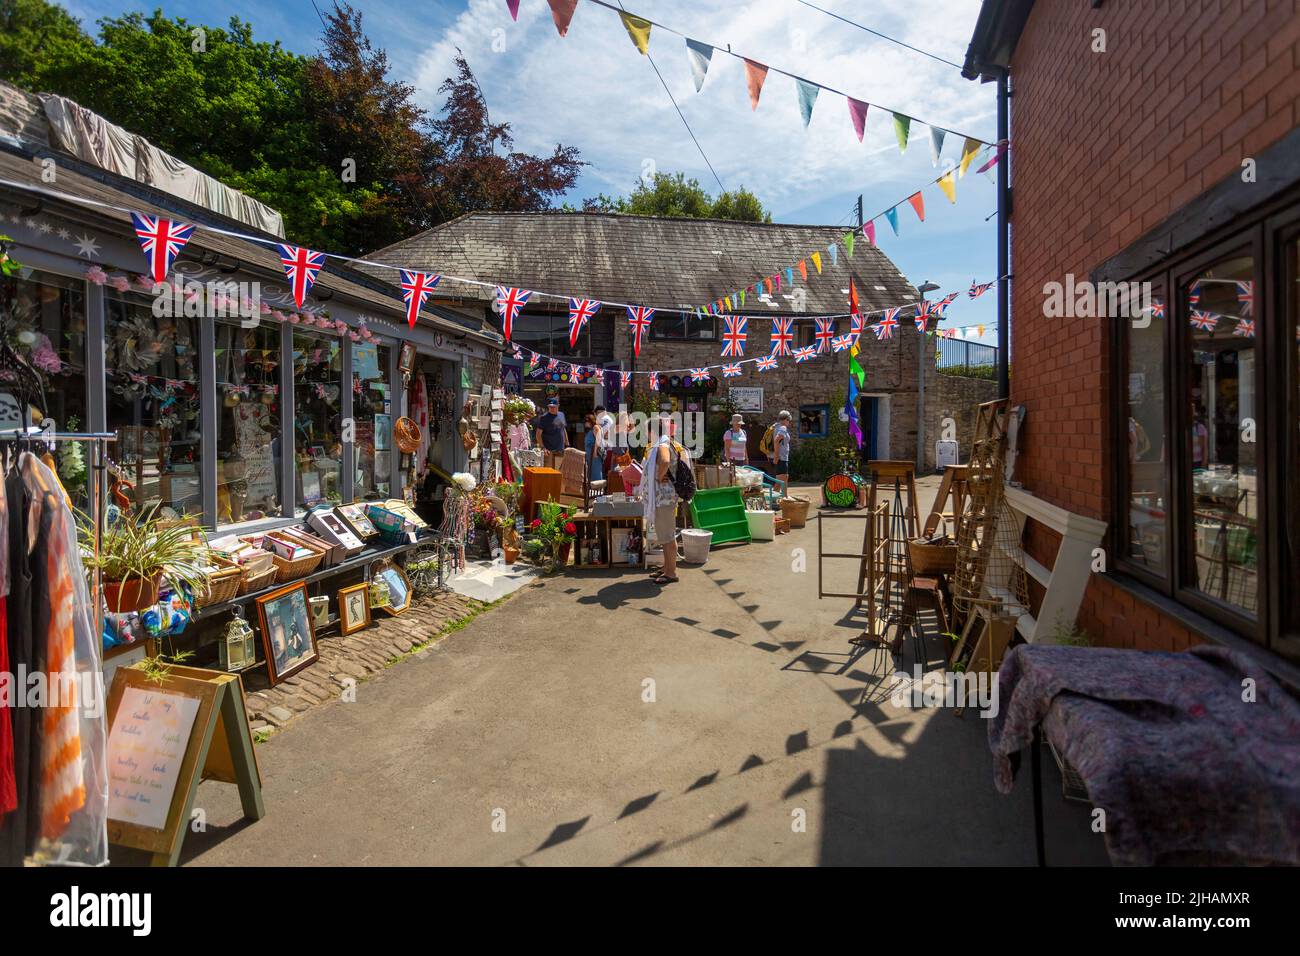 Editorial Hay-on-Wye, UK - July 16, 2022: Bric-a-brac shops in Hay-on-Wye, a town in South Wales known for lots of shops of second hand books and the Stock Photo